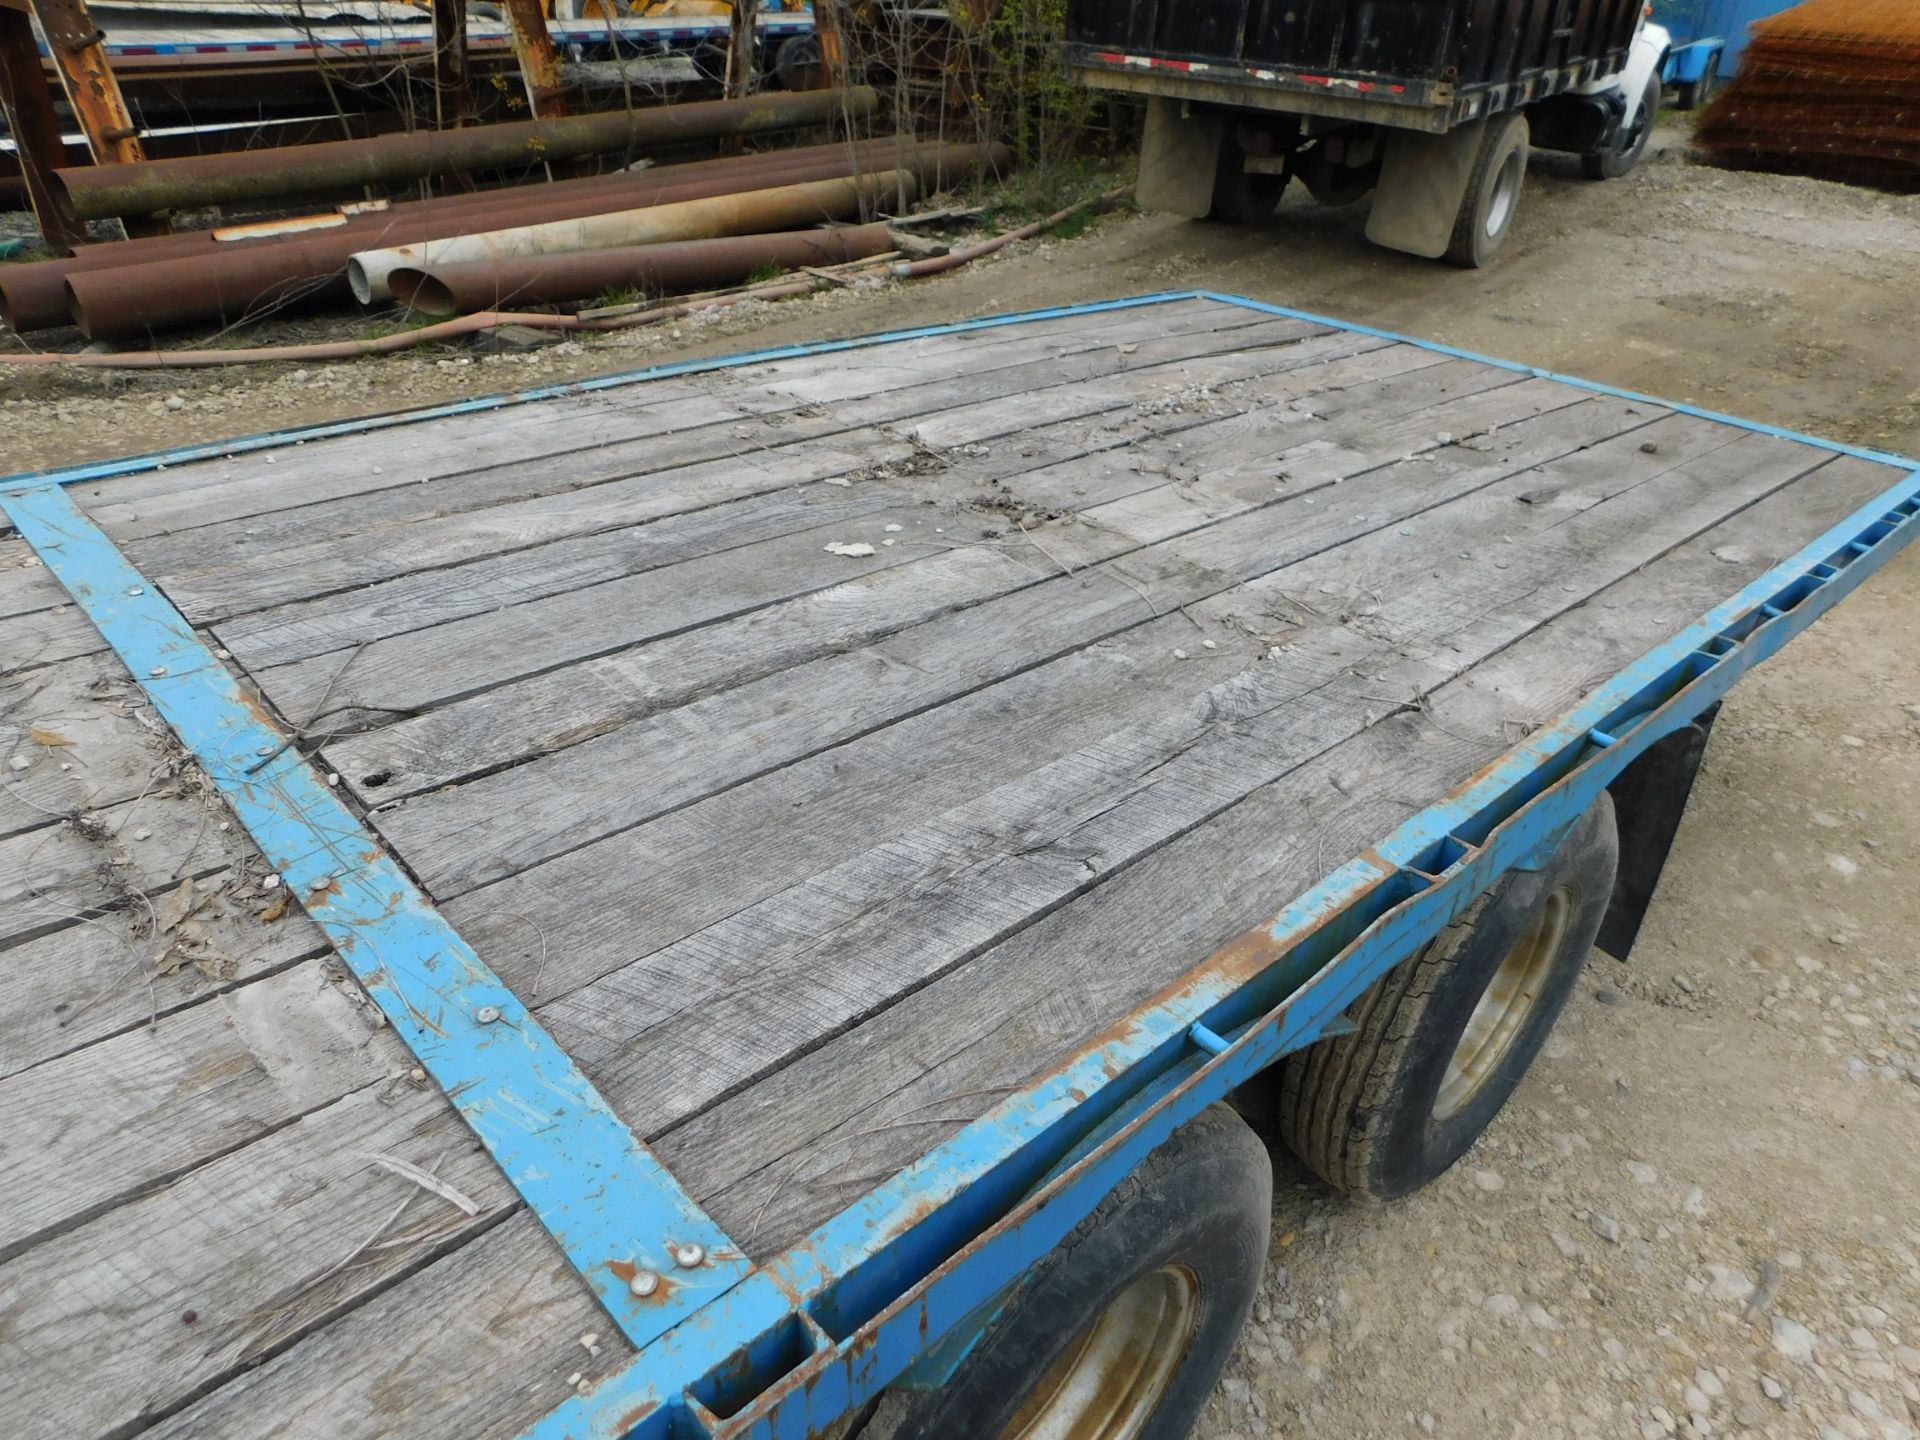 Gooseneck Trailer, Tandem Axle with Duals, 8' Wide x 26' Long, Wood Deck - Image 3 of 17